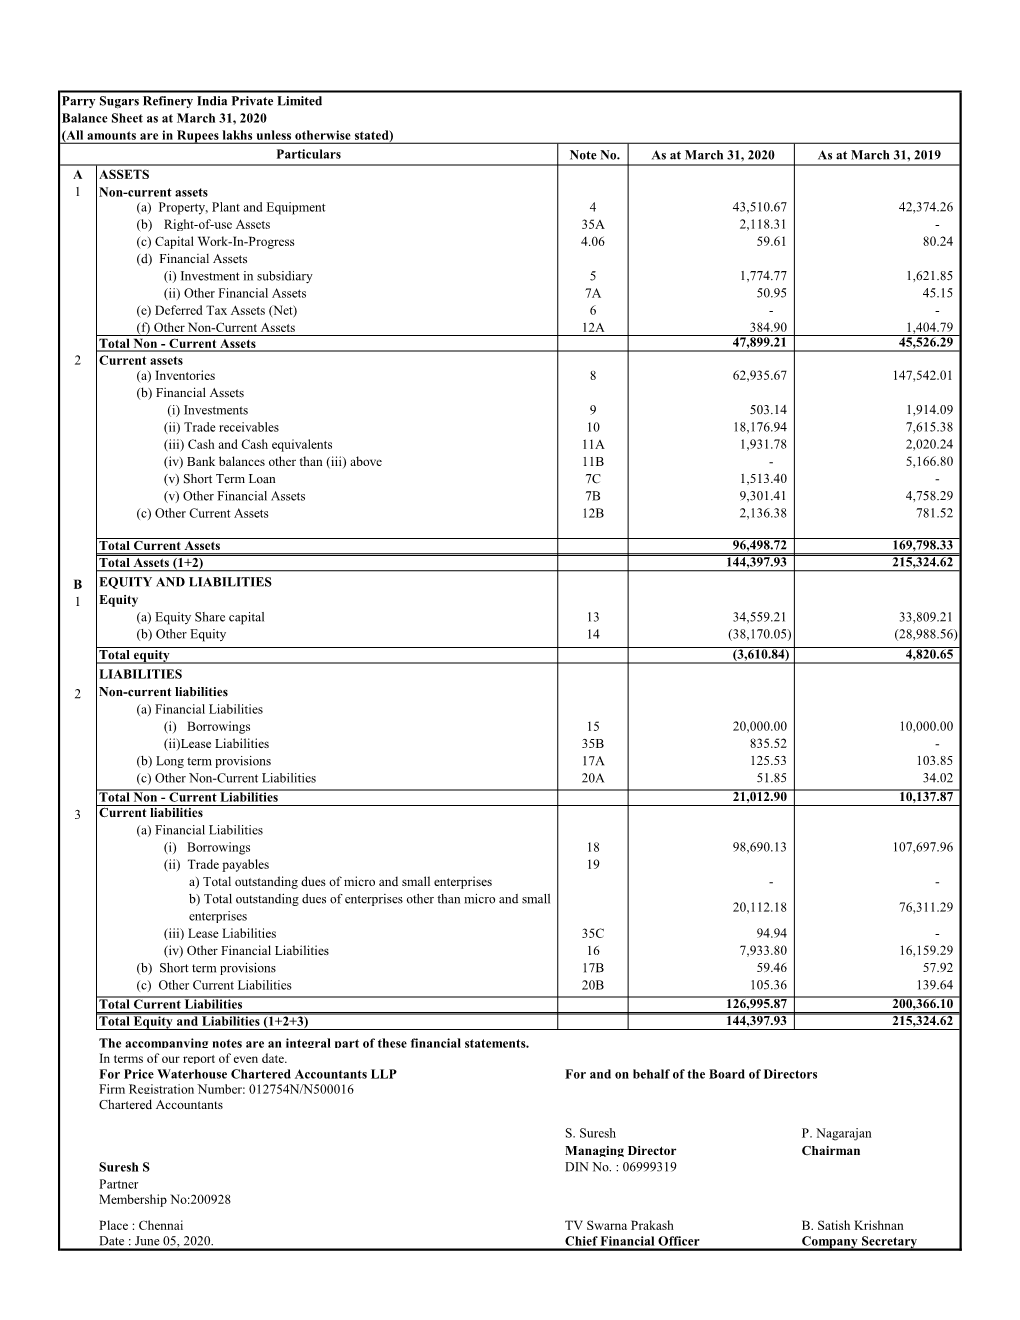 Parry Sugars Refinery India Private Limited Balance Sheet As at March 31, 2020 (All Amounts Are in Rupees Lakhs Unless Otherwise Stated) Particulars Note No